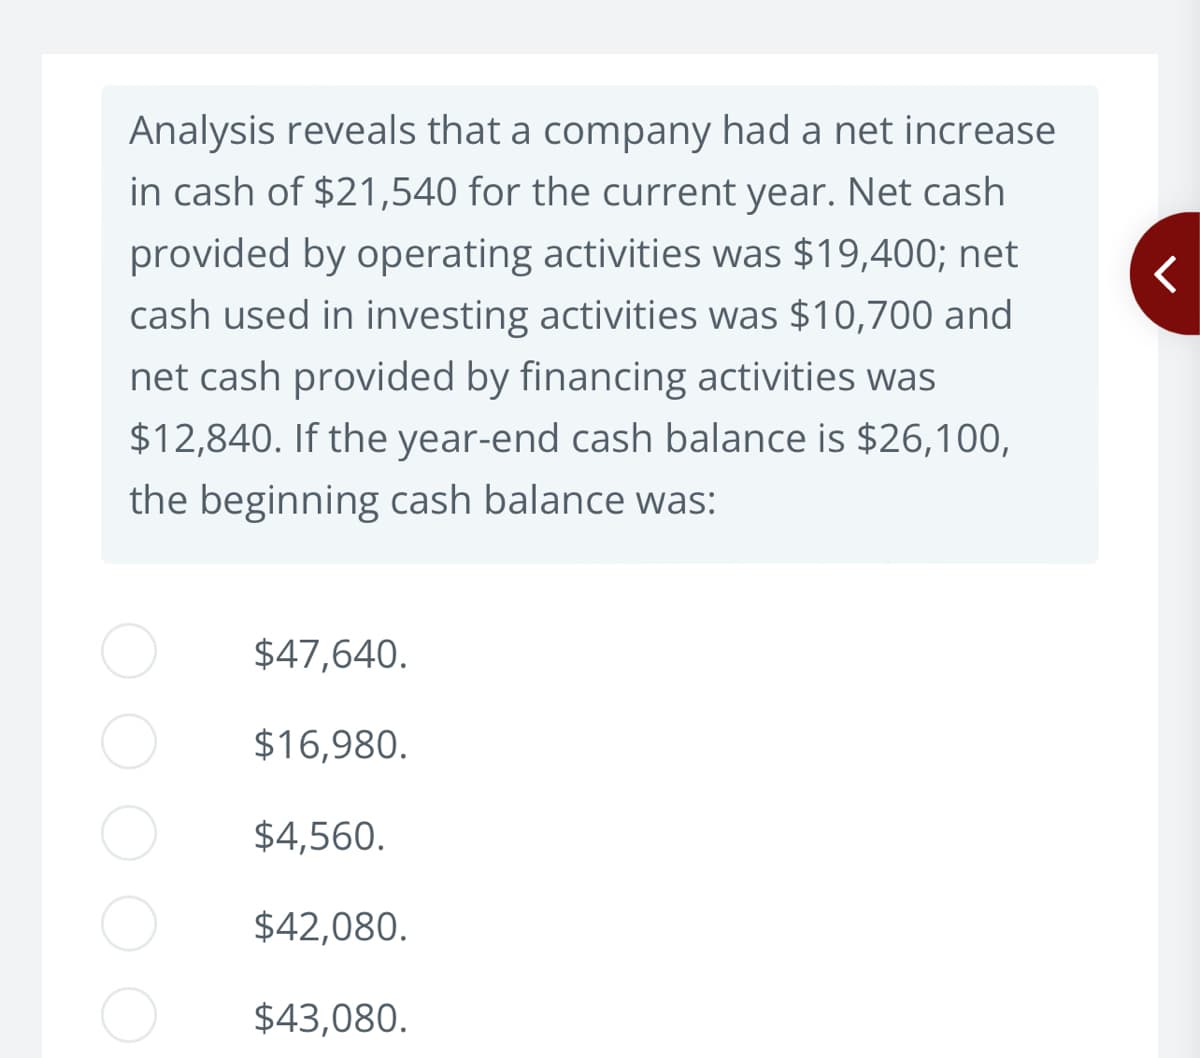 Analysis reveals that a company had a net increase
in cash of $21,540 for the current year. Net cash
provided by operating activities was $19,400; net
cash used in investing activities was $10,700 and
net cash provided by financing activities was
$12,840. If the year-end cash balance is $26,100,
the beginning cash balance was:
$47,640.
$16,980.
$4,560.
$42,080.
$43,080.